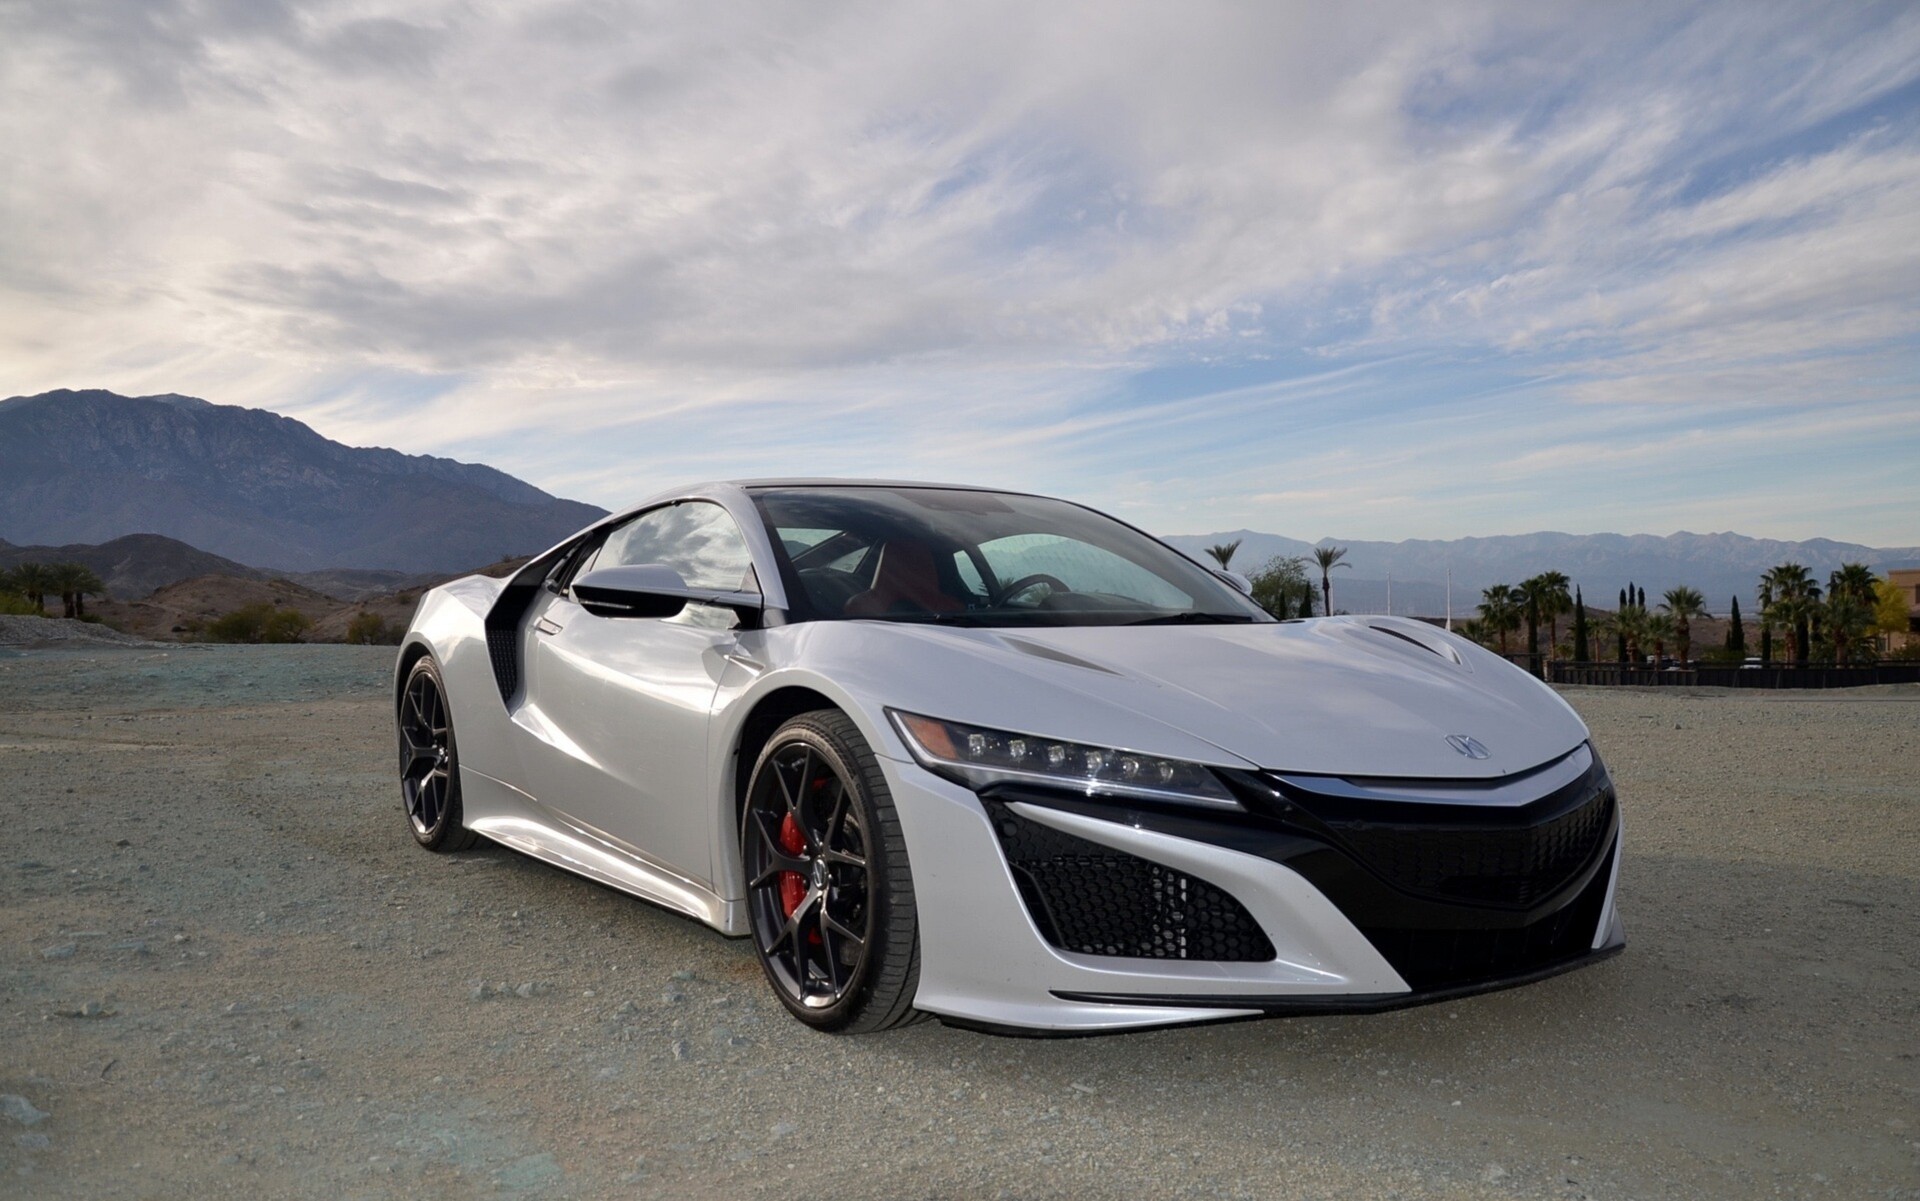 Acura NSX, High quality wallpapers, 1920x1210 HD Desktop